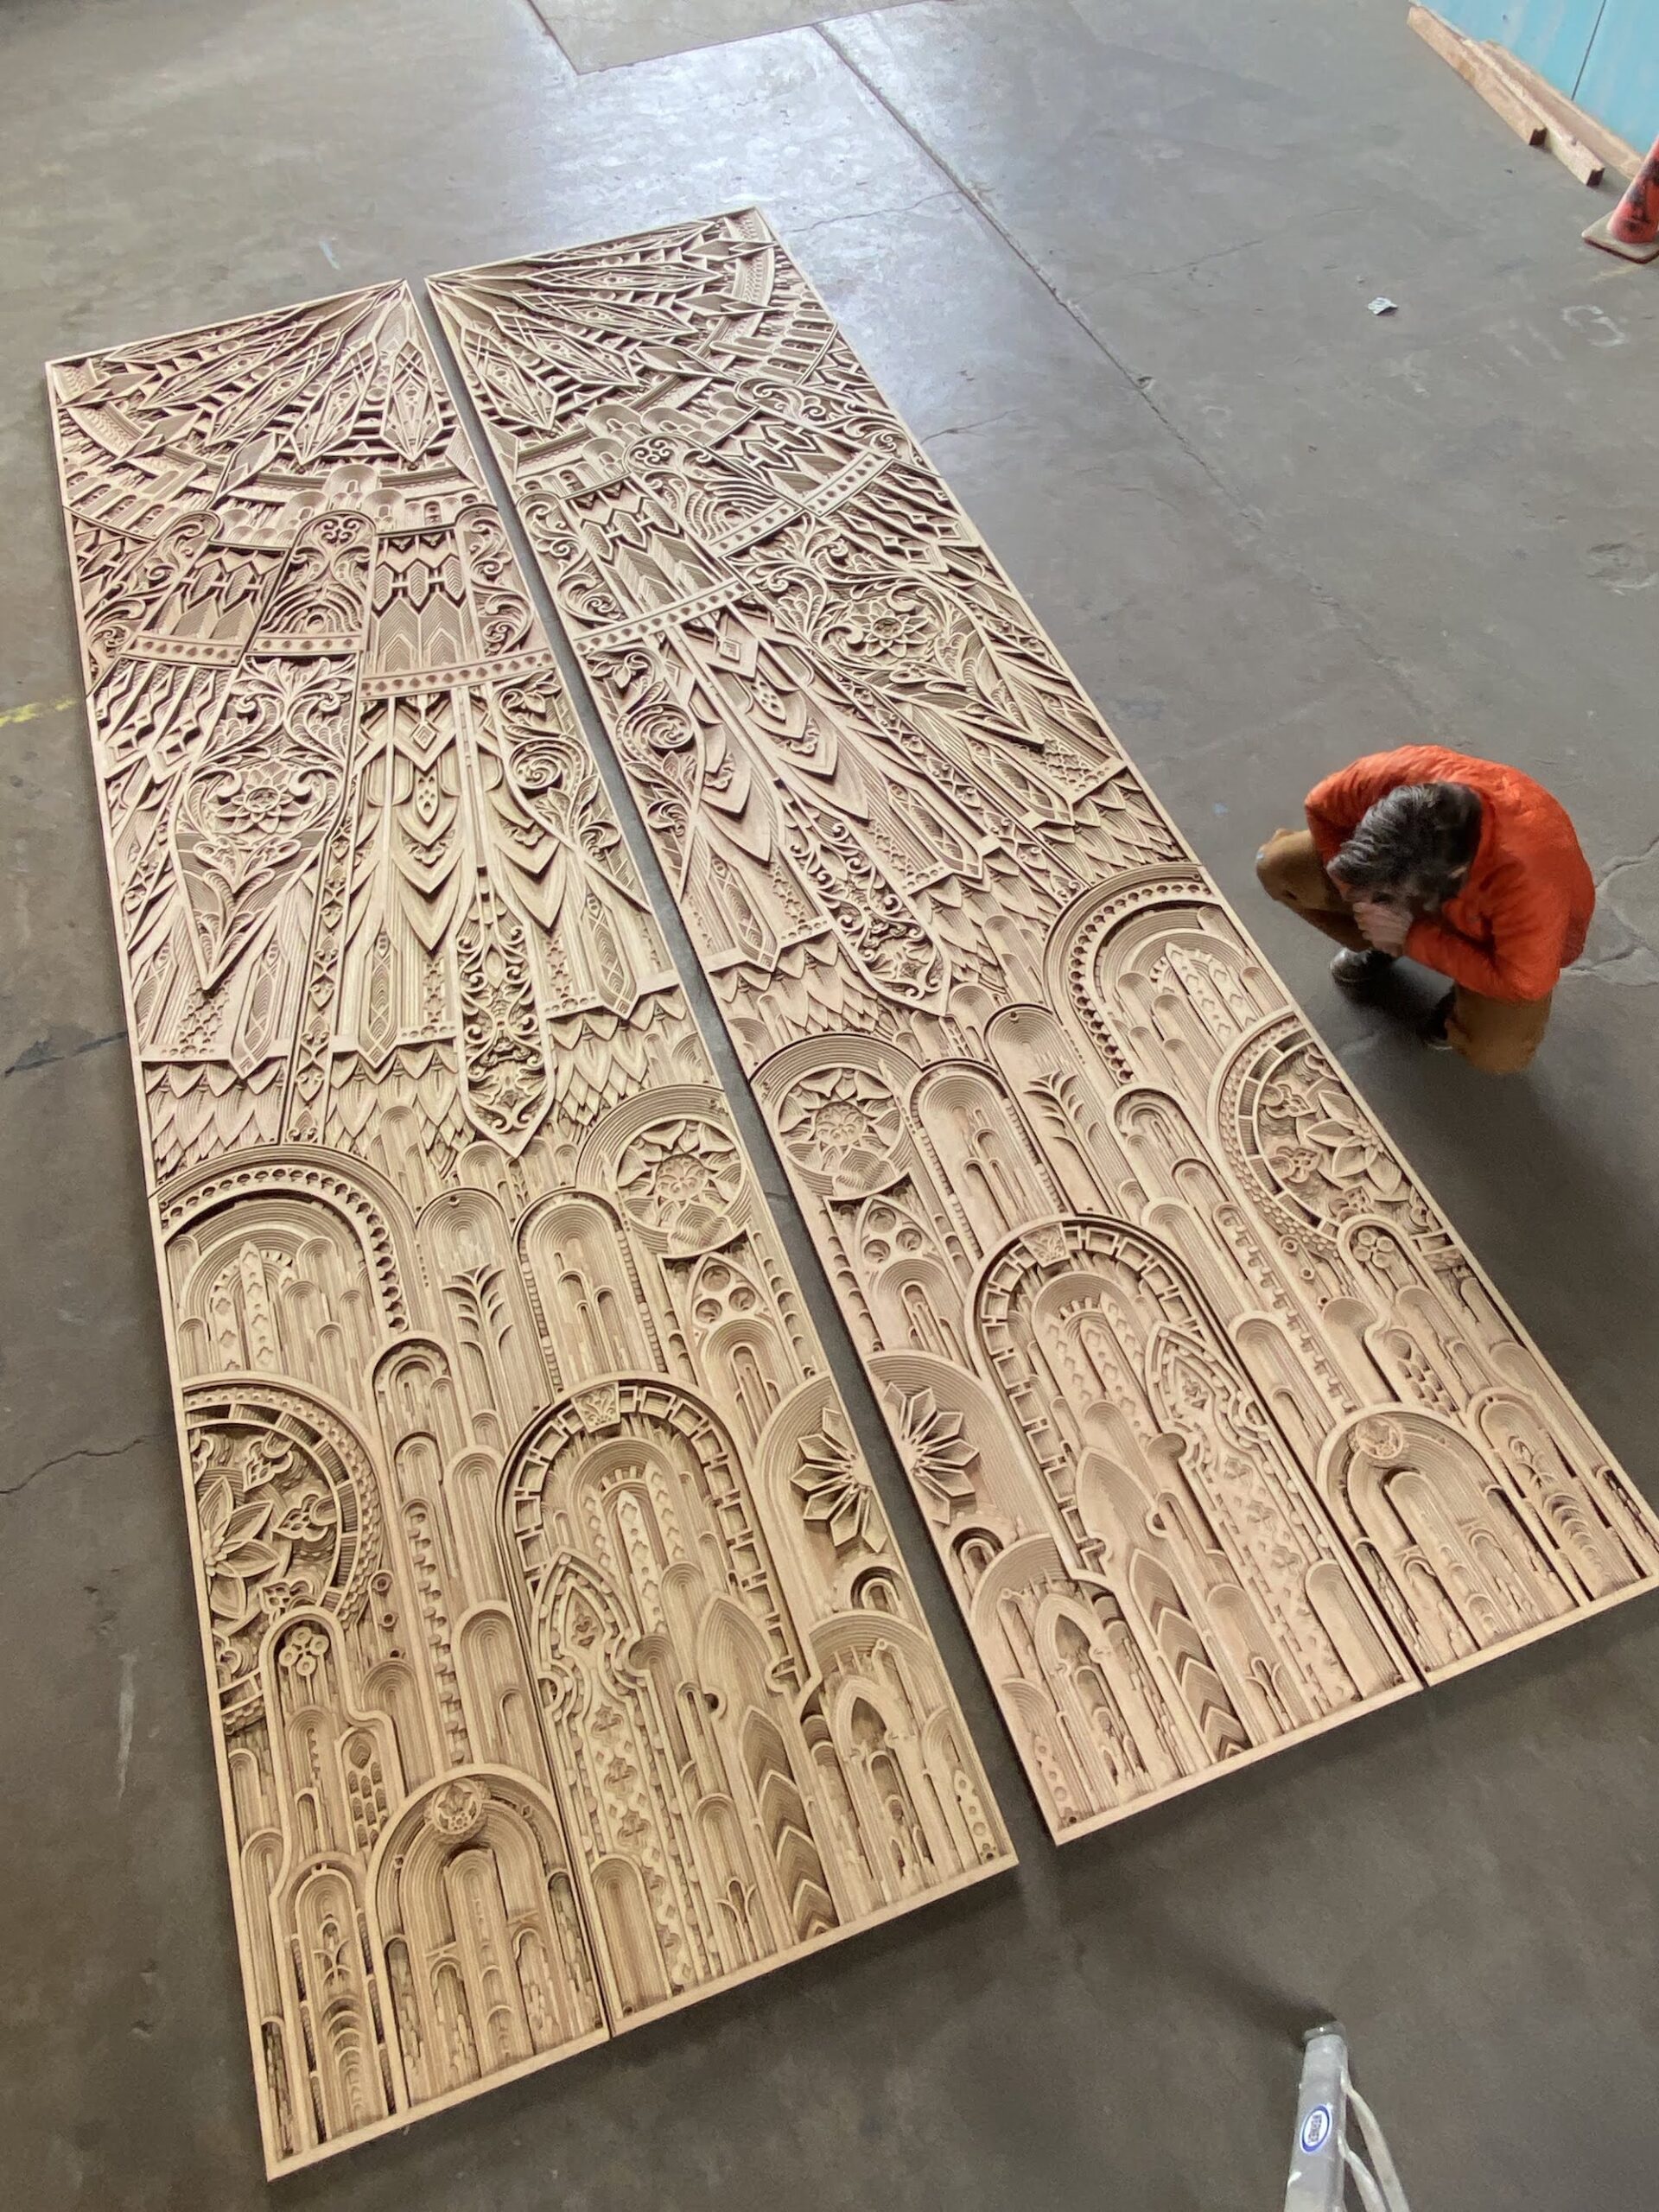 Two panel reliefs made from layers of laser-cut plywood.